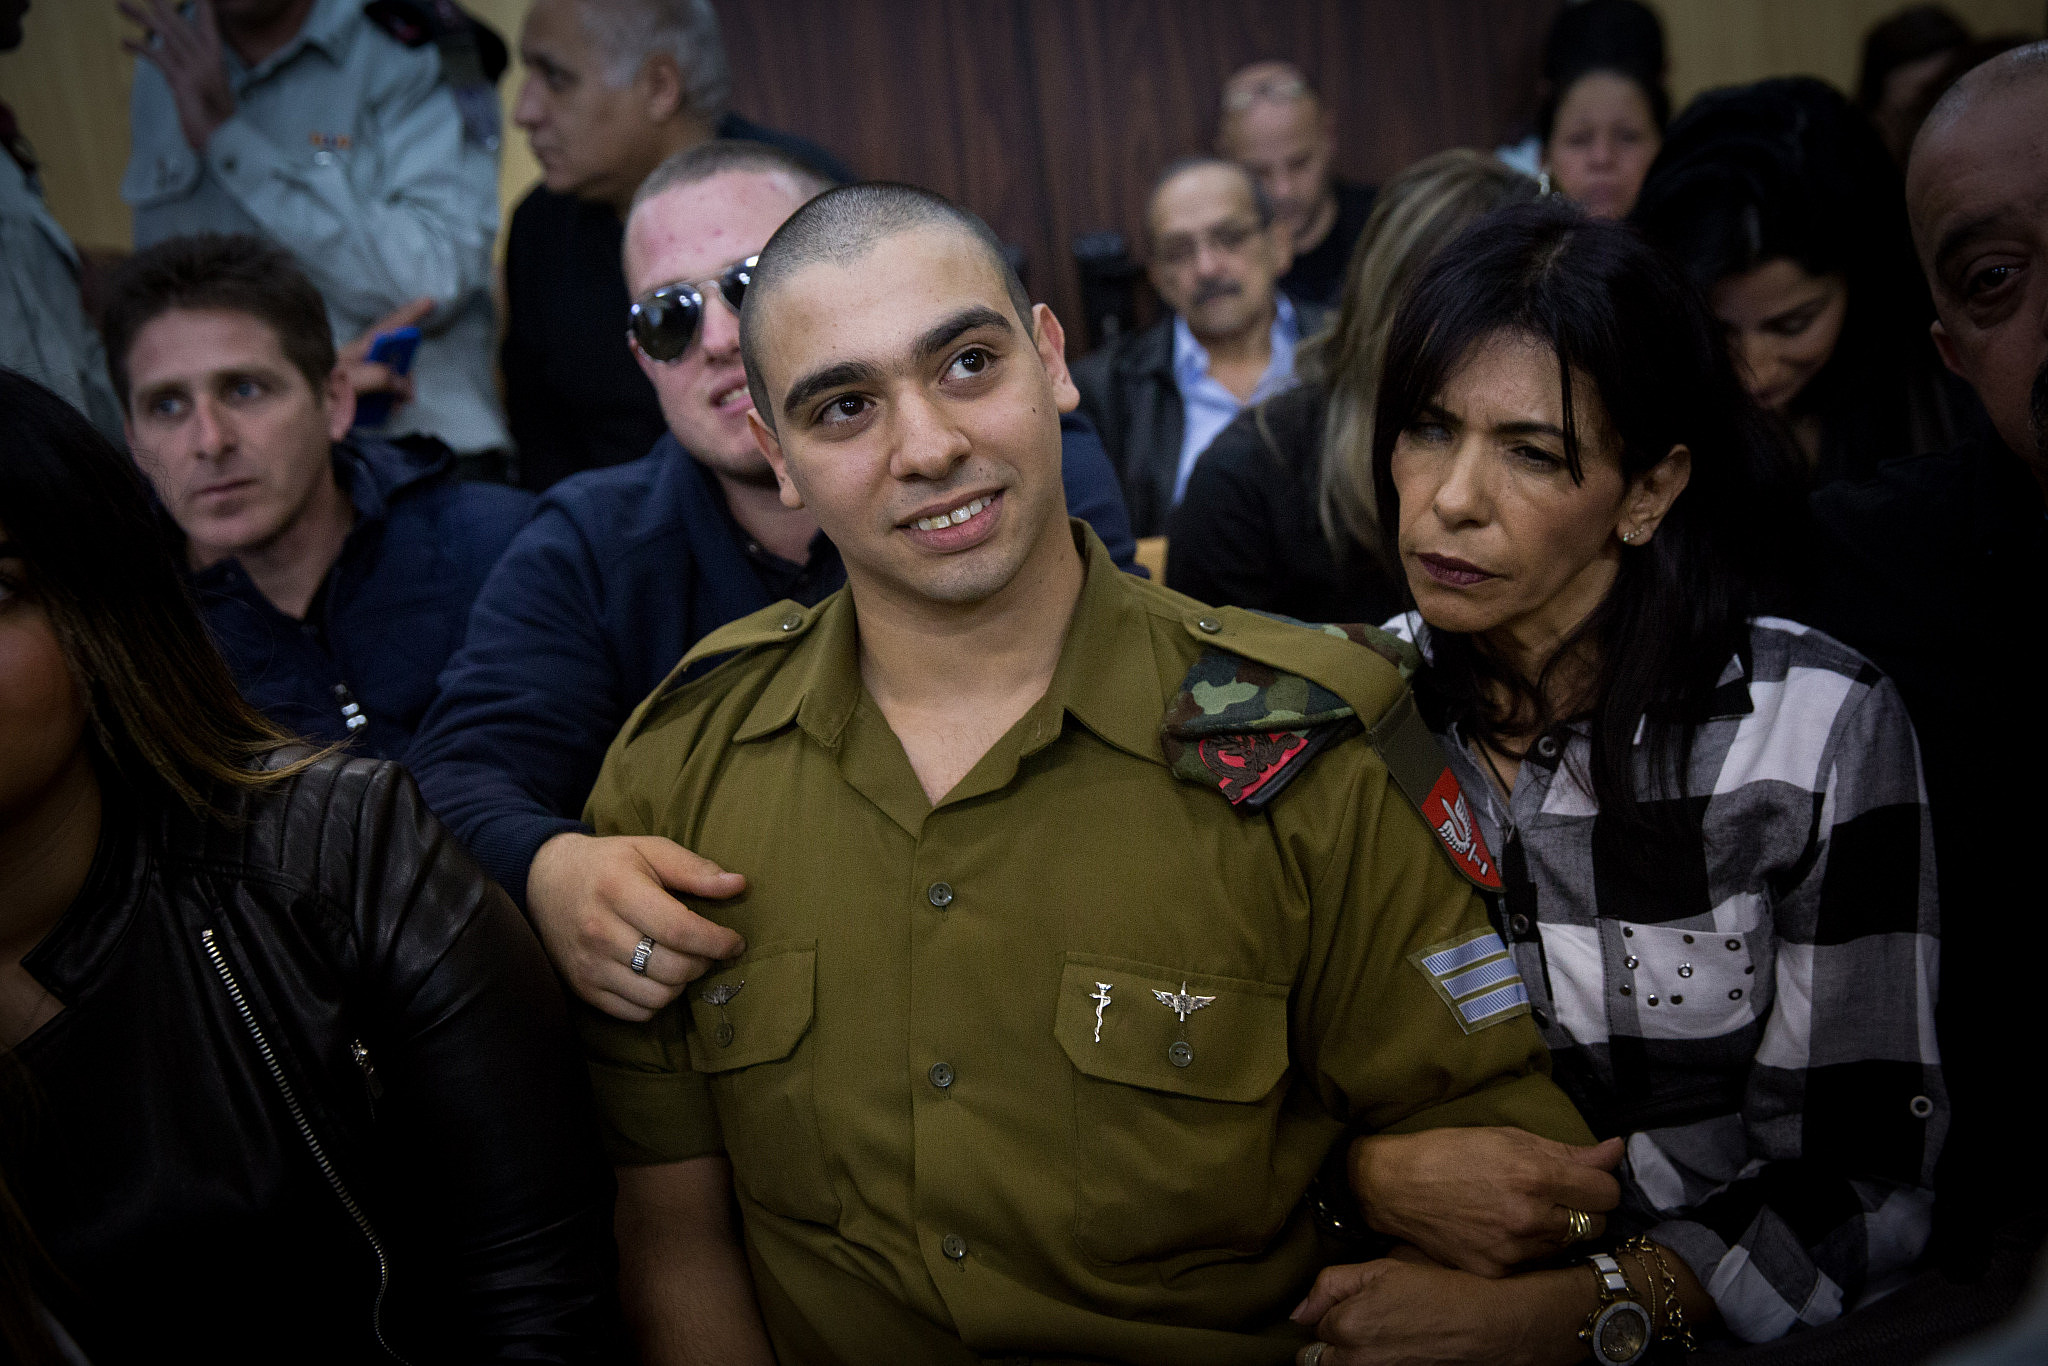 IDF Sgt. Elor Azaria, the Israeli soldier, who shot dead a disarmed and injured Palestinian attacker in the West Bank city of Hebron, is surrounded by family and friends as he awaits to hear his verdict in a courtroom at the Kirya military base in Tel Aviv, January 4, 2017. (Miriam Alster/Flash90)